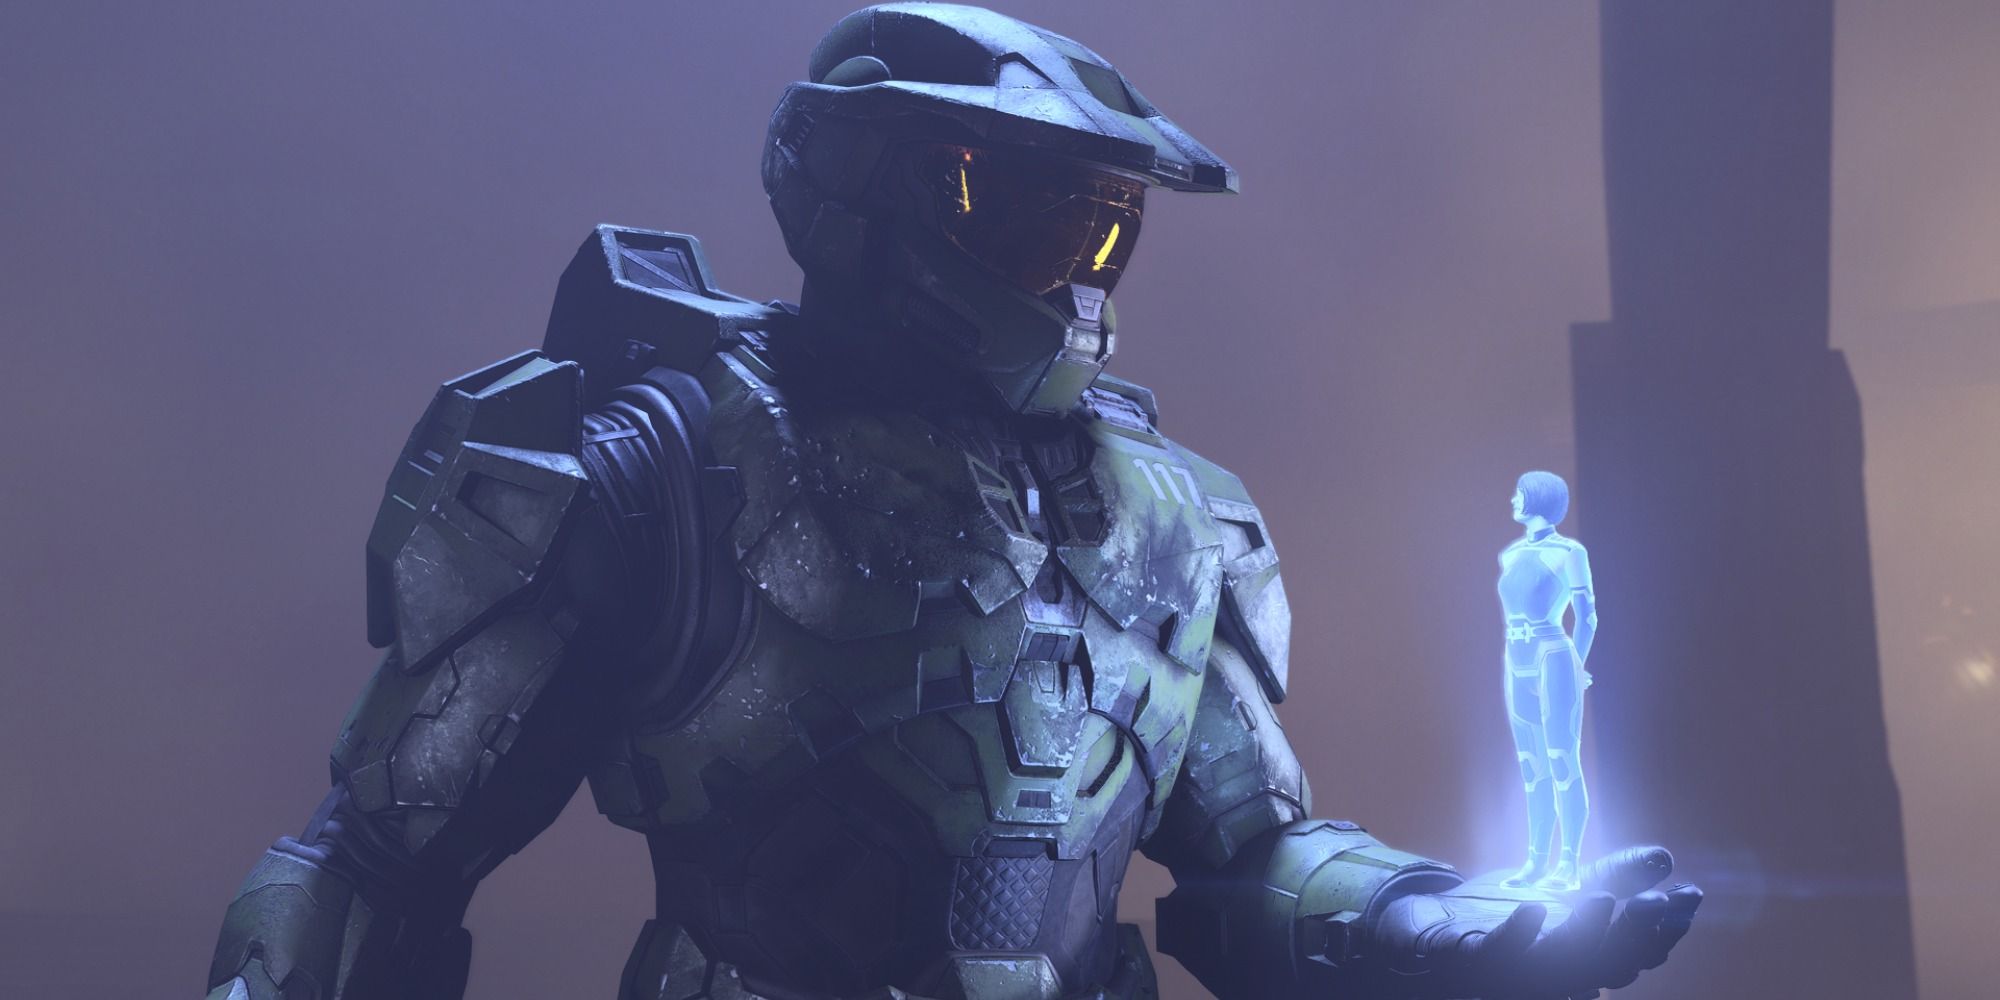 Master Chief holding Cortana's image in his hand